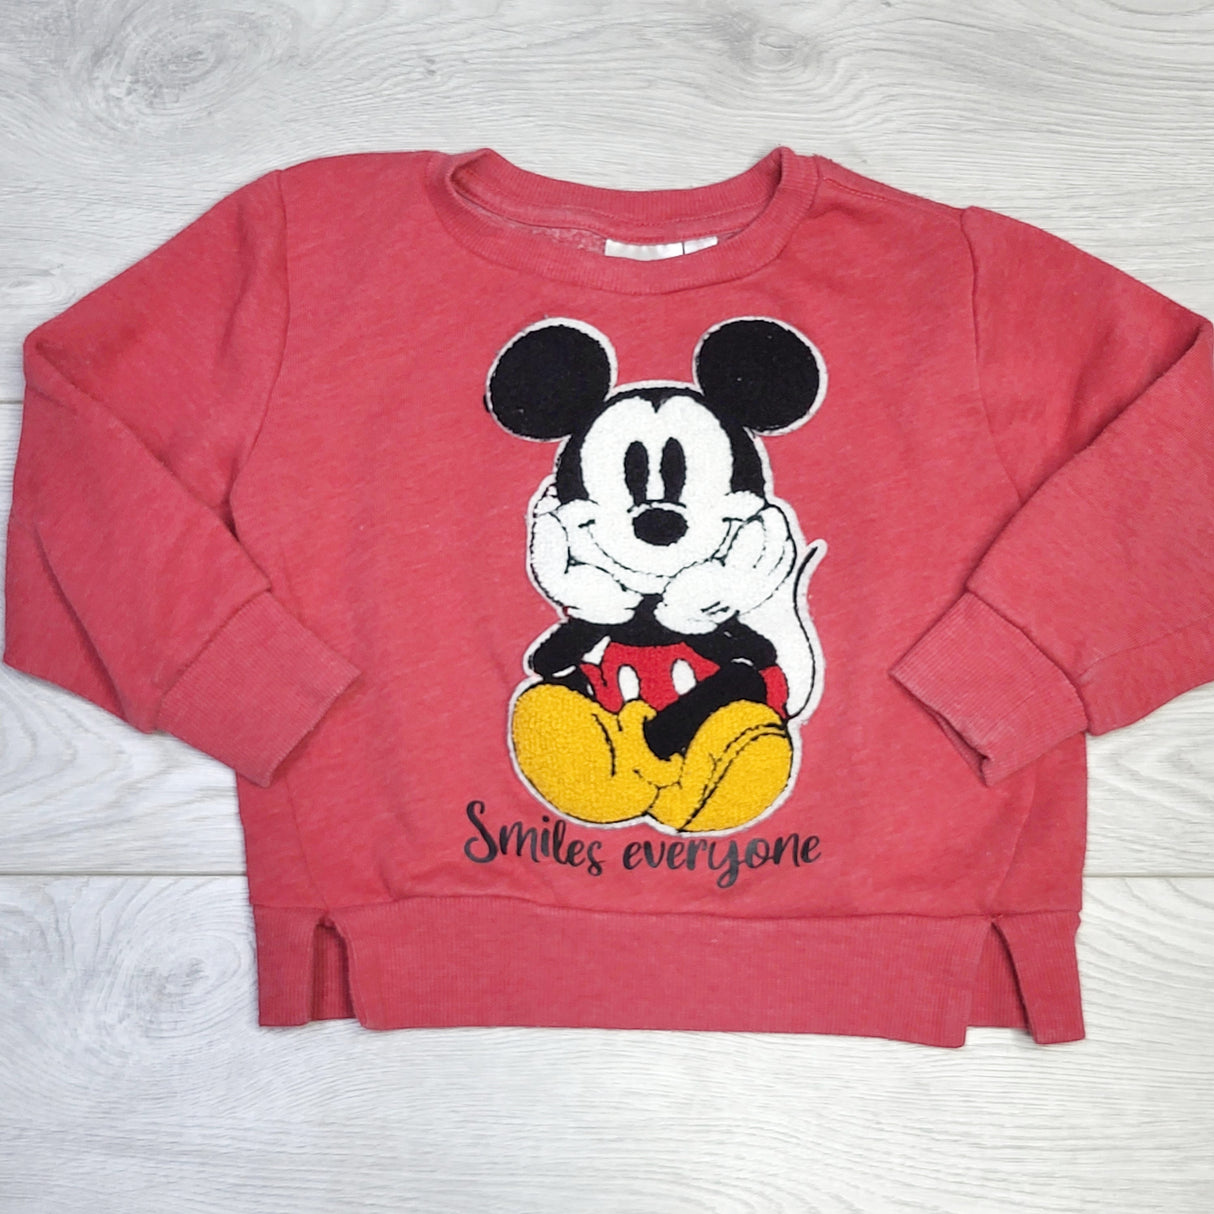 CRTH1 - Disney Junior red Mickey Mouse sweatshirt. Size 3T